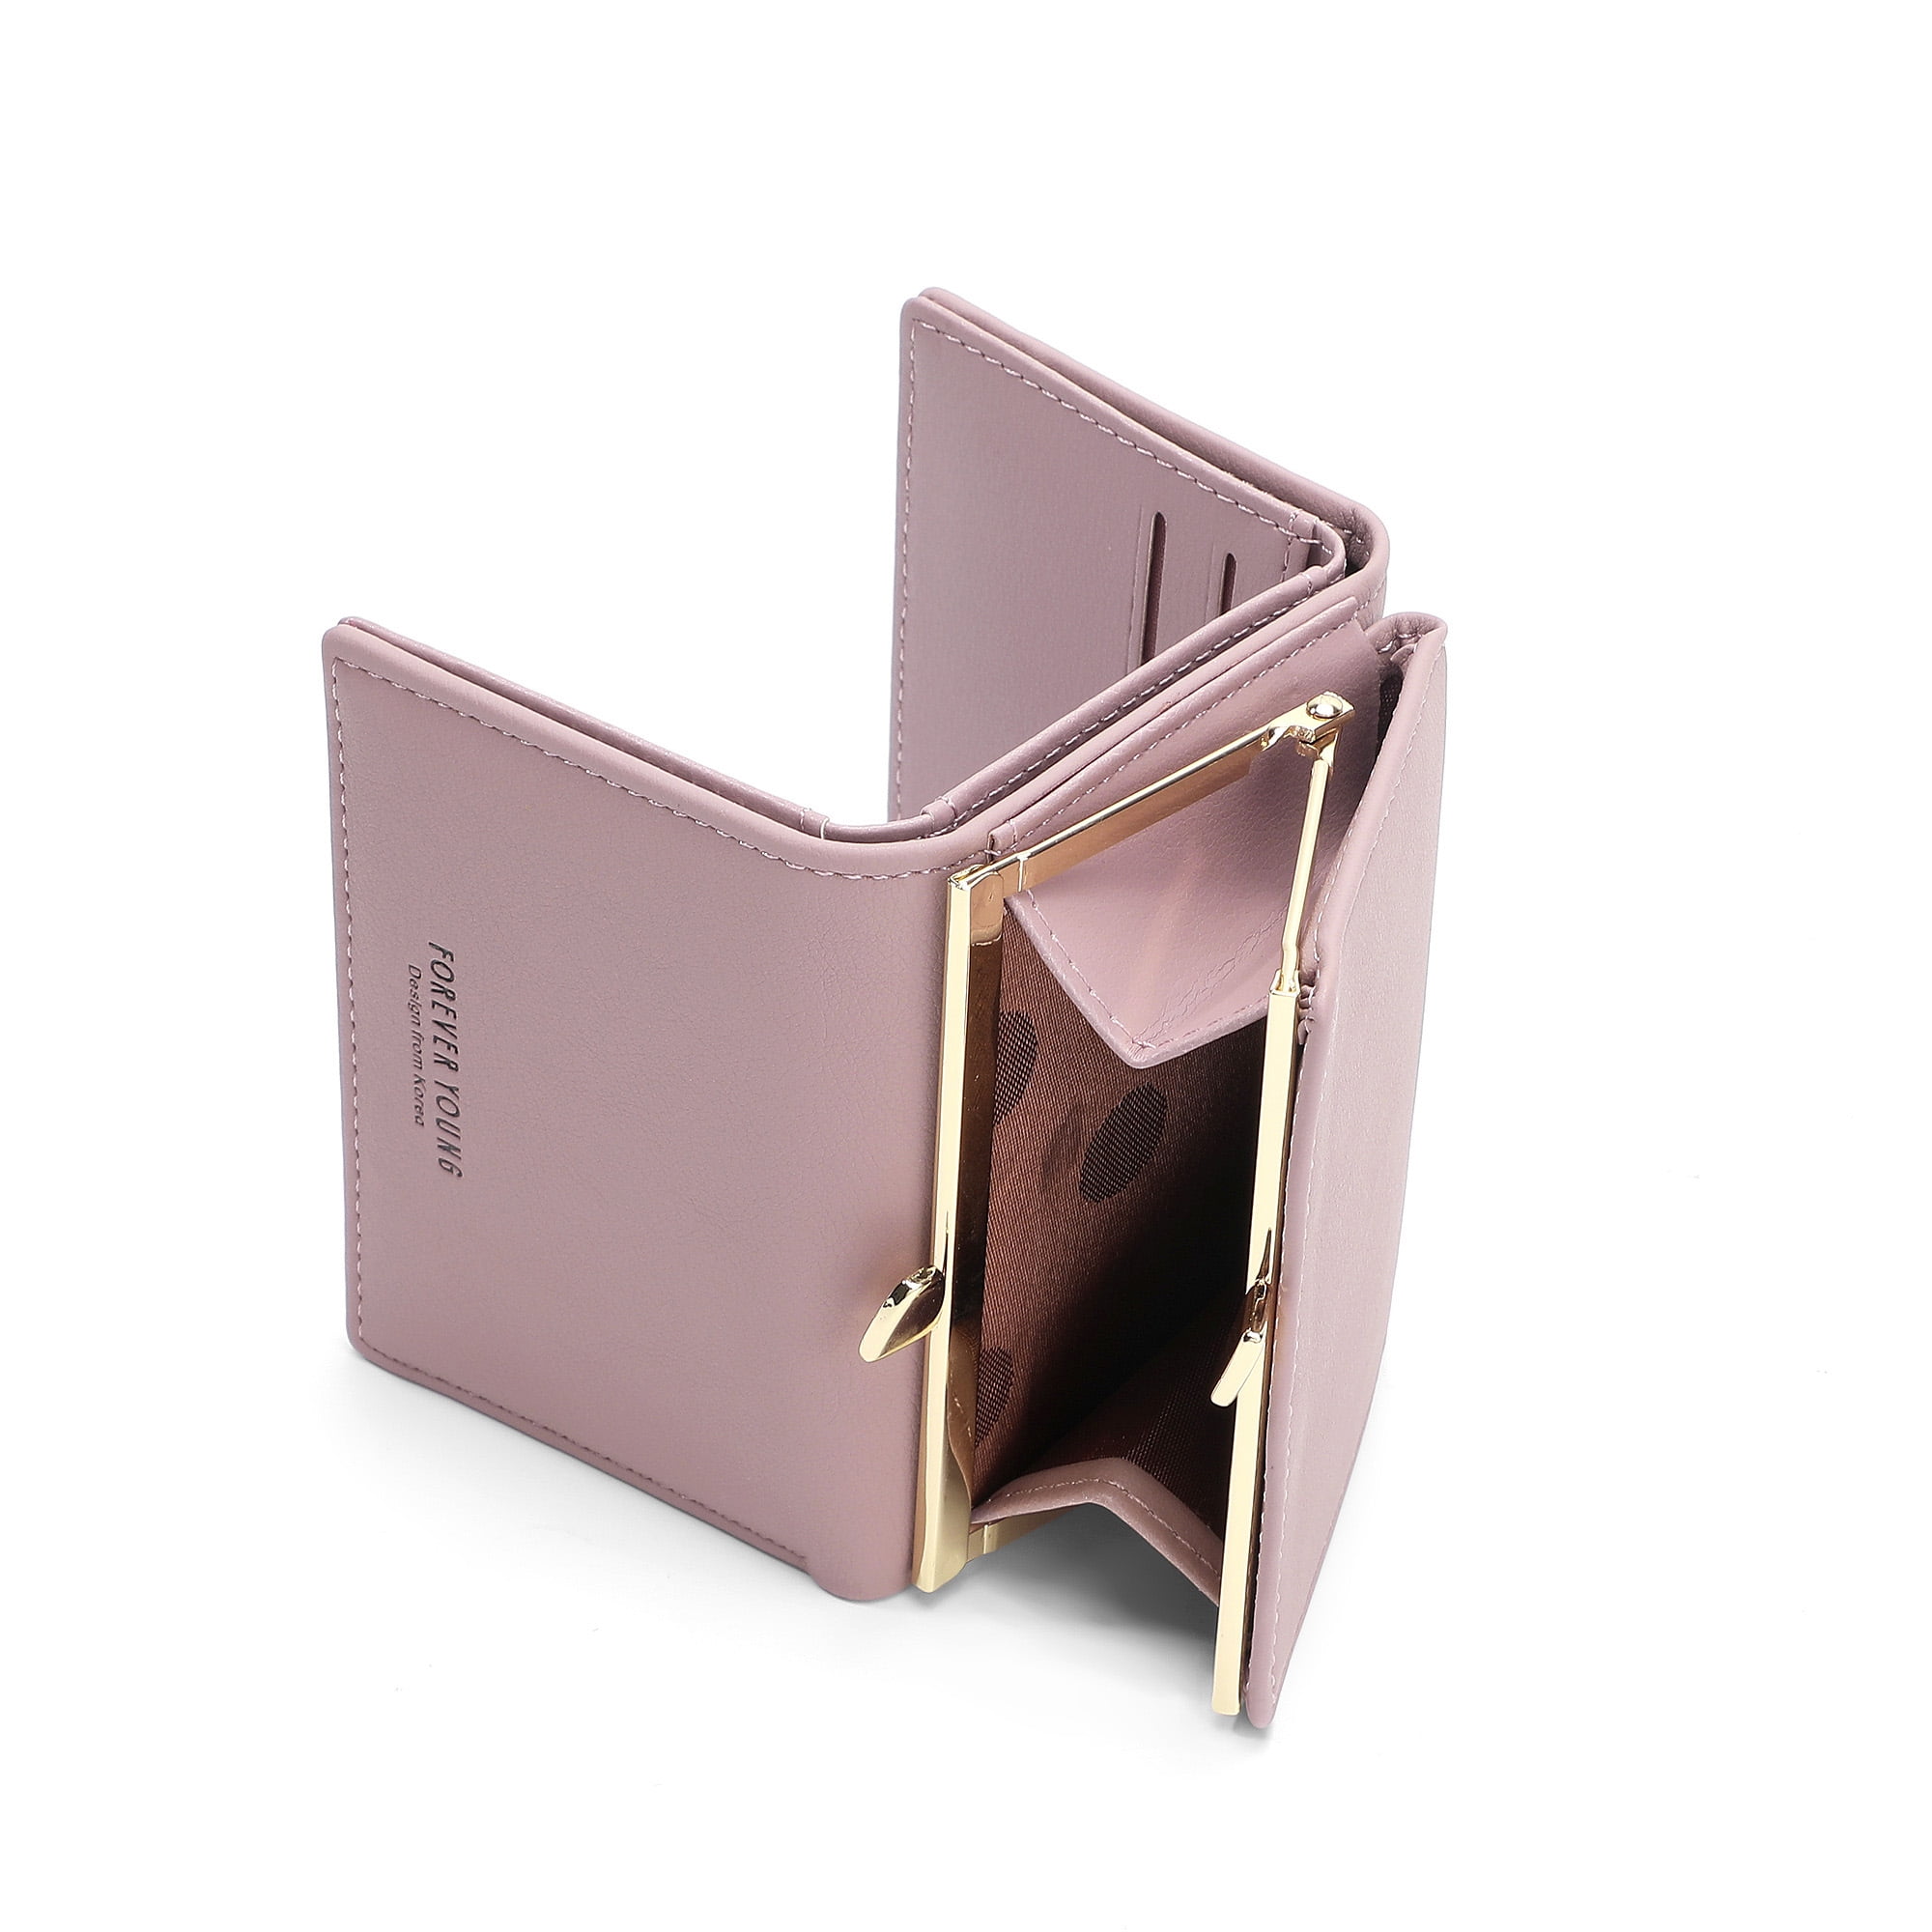 Small Cute Trifold Wallet Slim Wallet ID/Photo Window Card Holder with 3D  Flower Pattern Buckle for Women Girls (PINK)